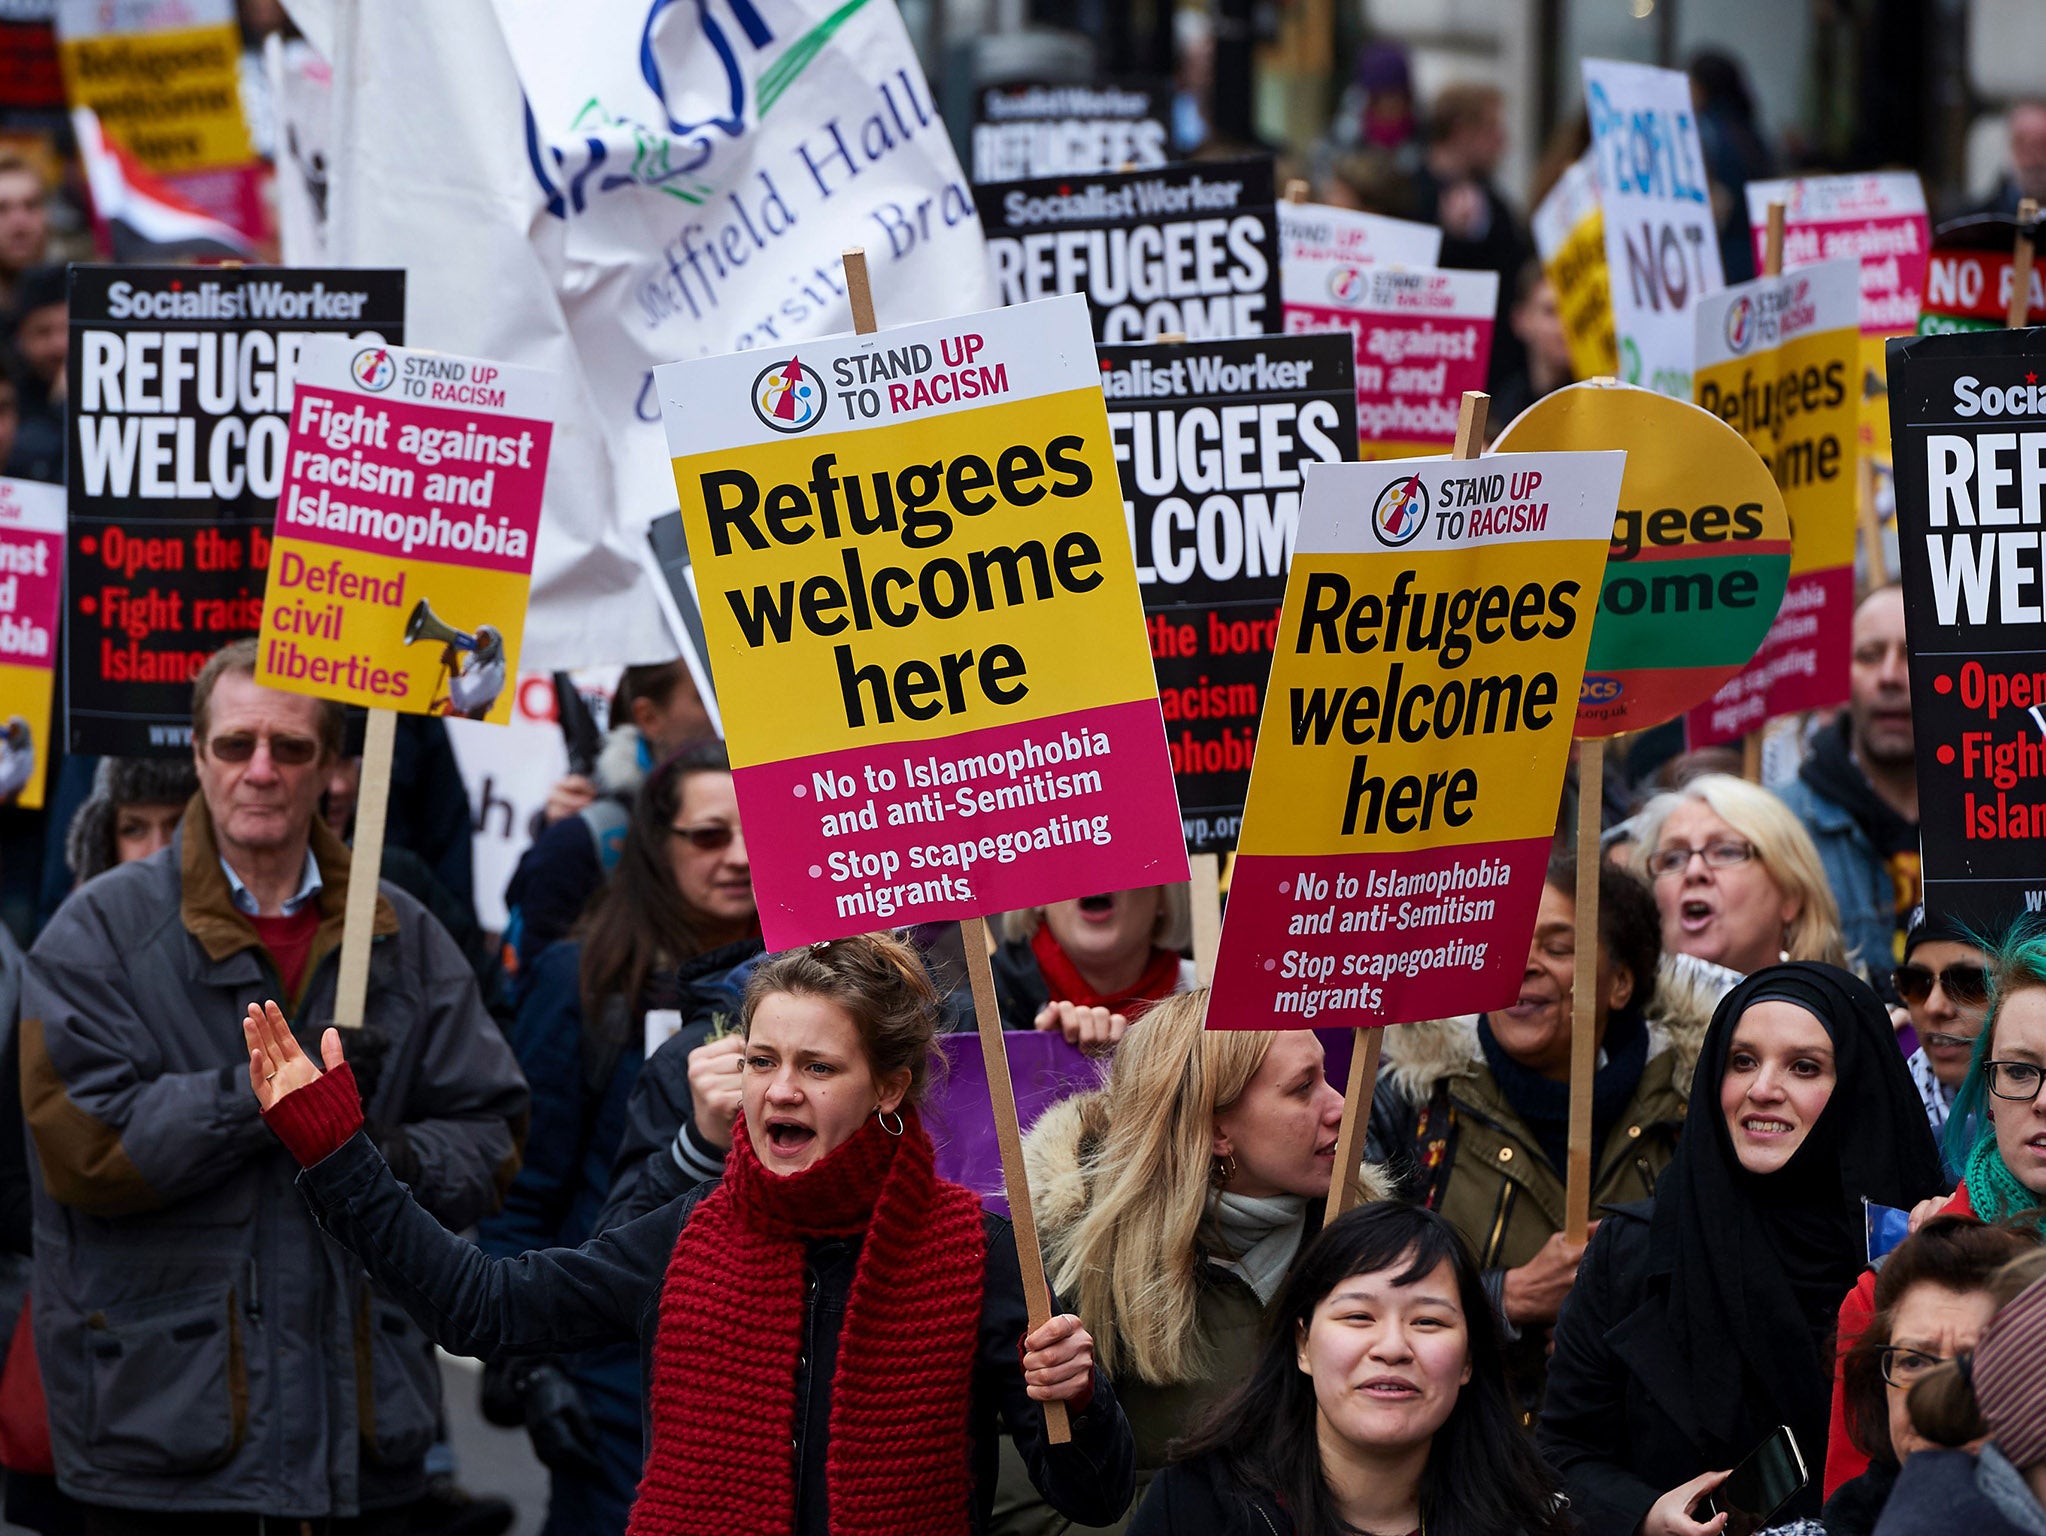 Demonstrators hold banners in support of refugees as they march through central London on March 19